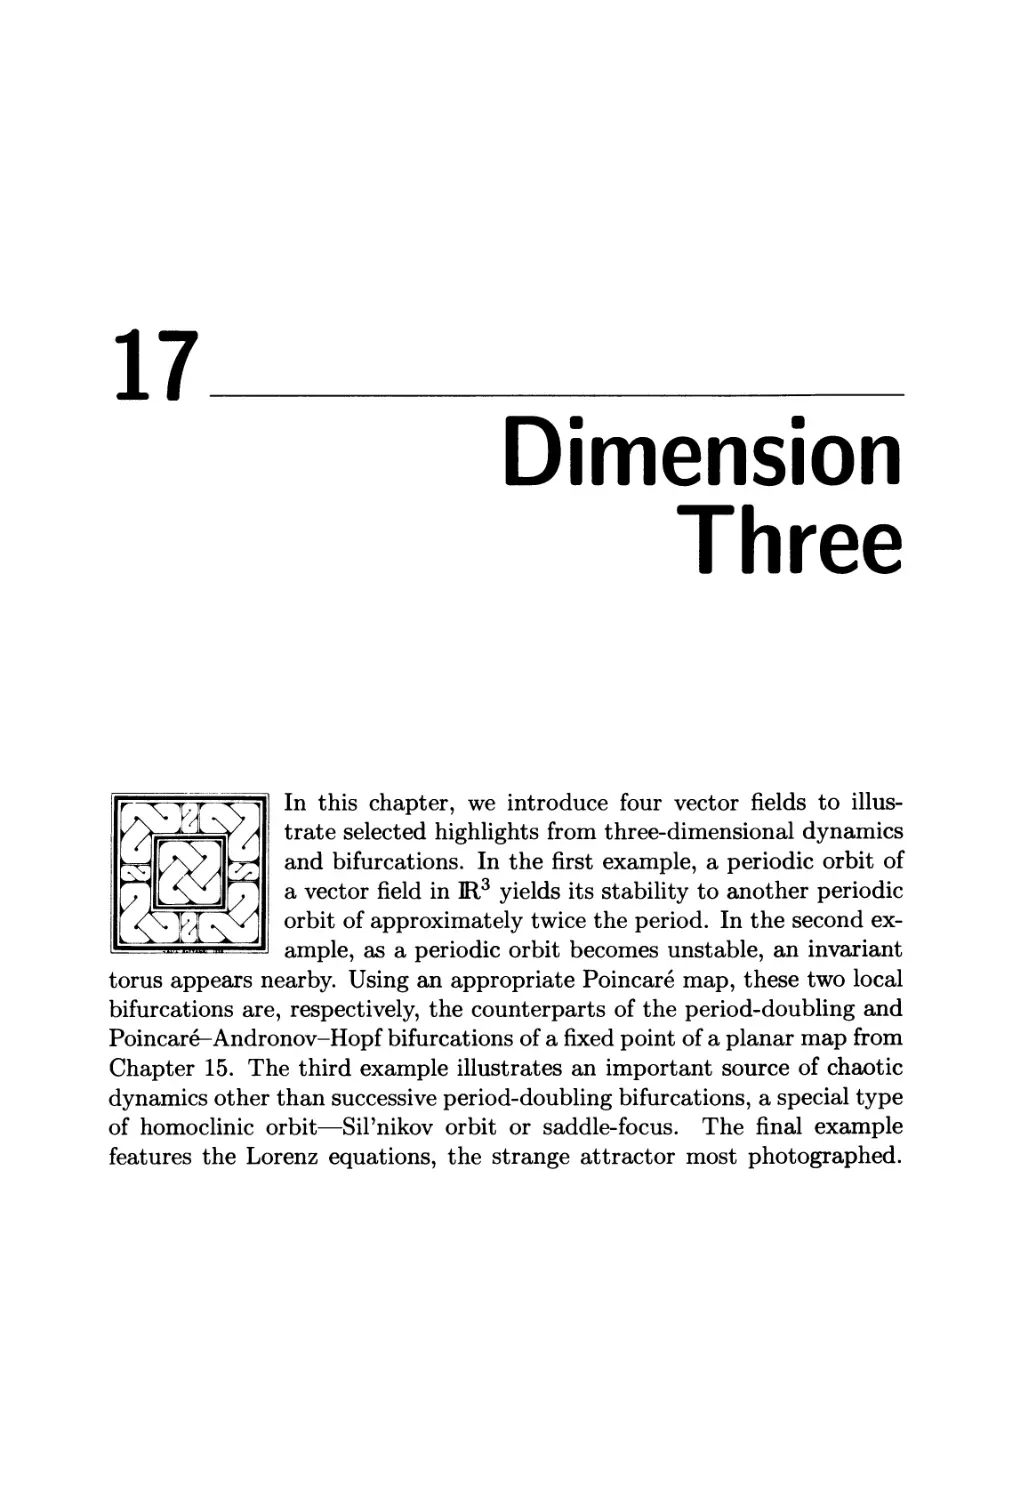 Chapter 17. Dimension Three